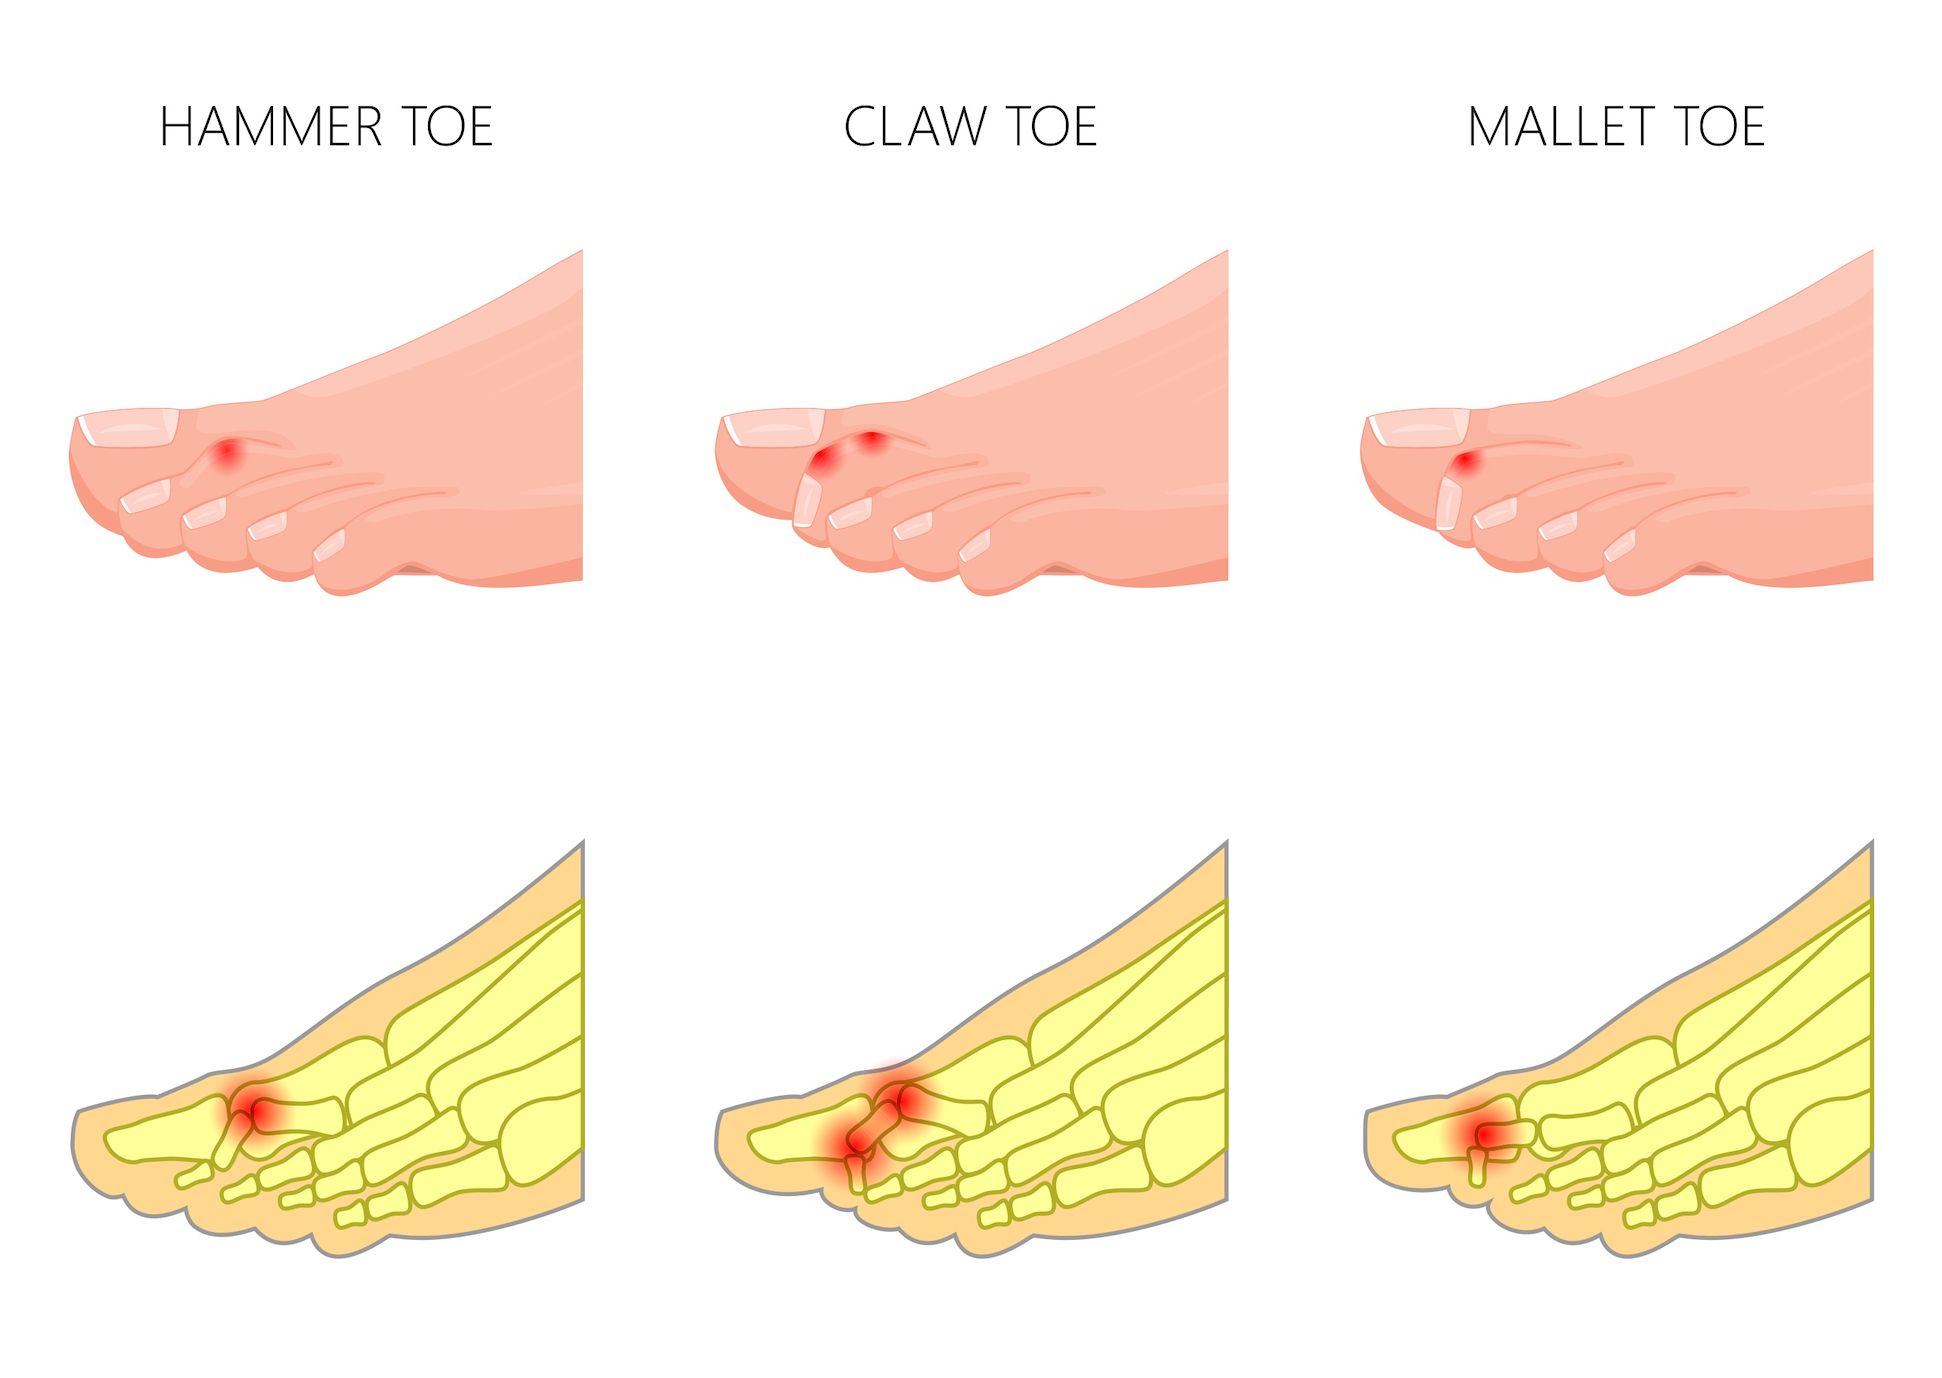 Fixing Curly Toes Hammertoes Claw Toes And Mallet Toes Perform Podiatry